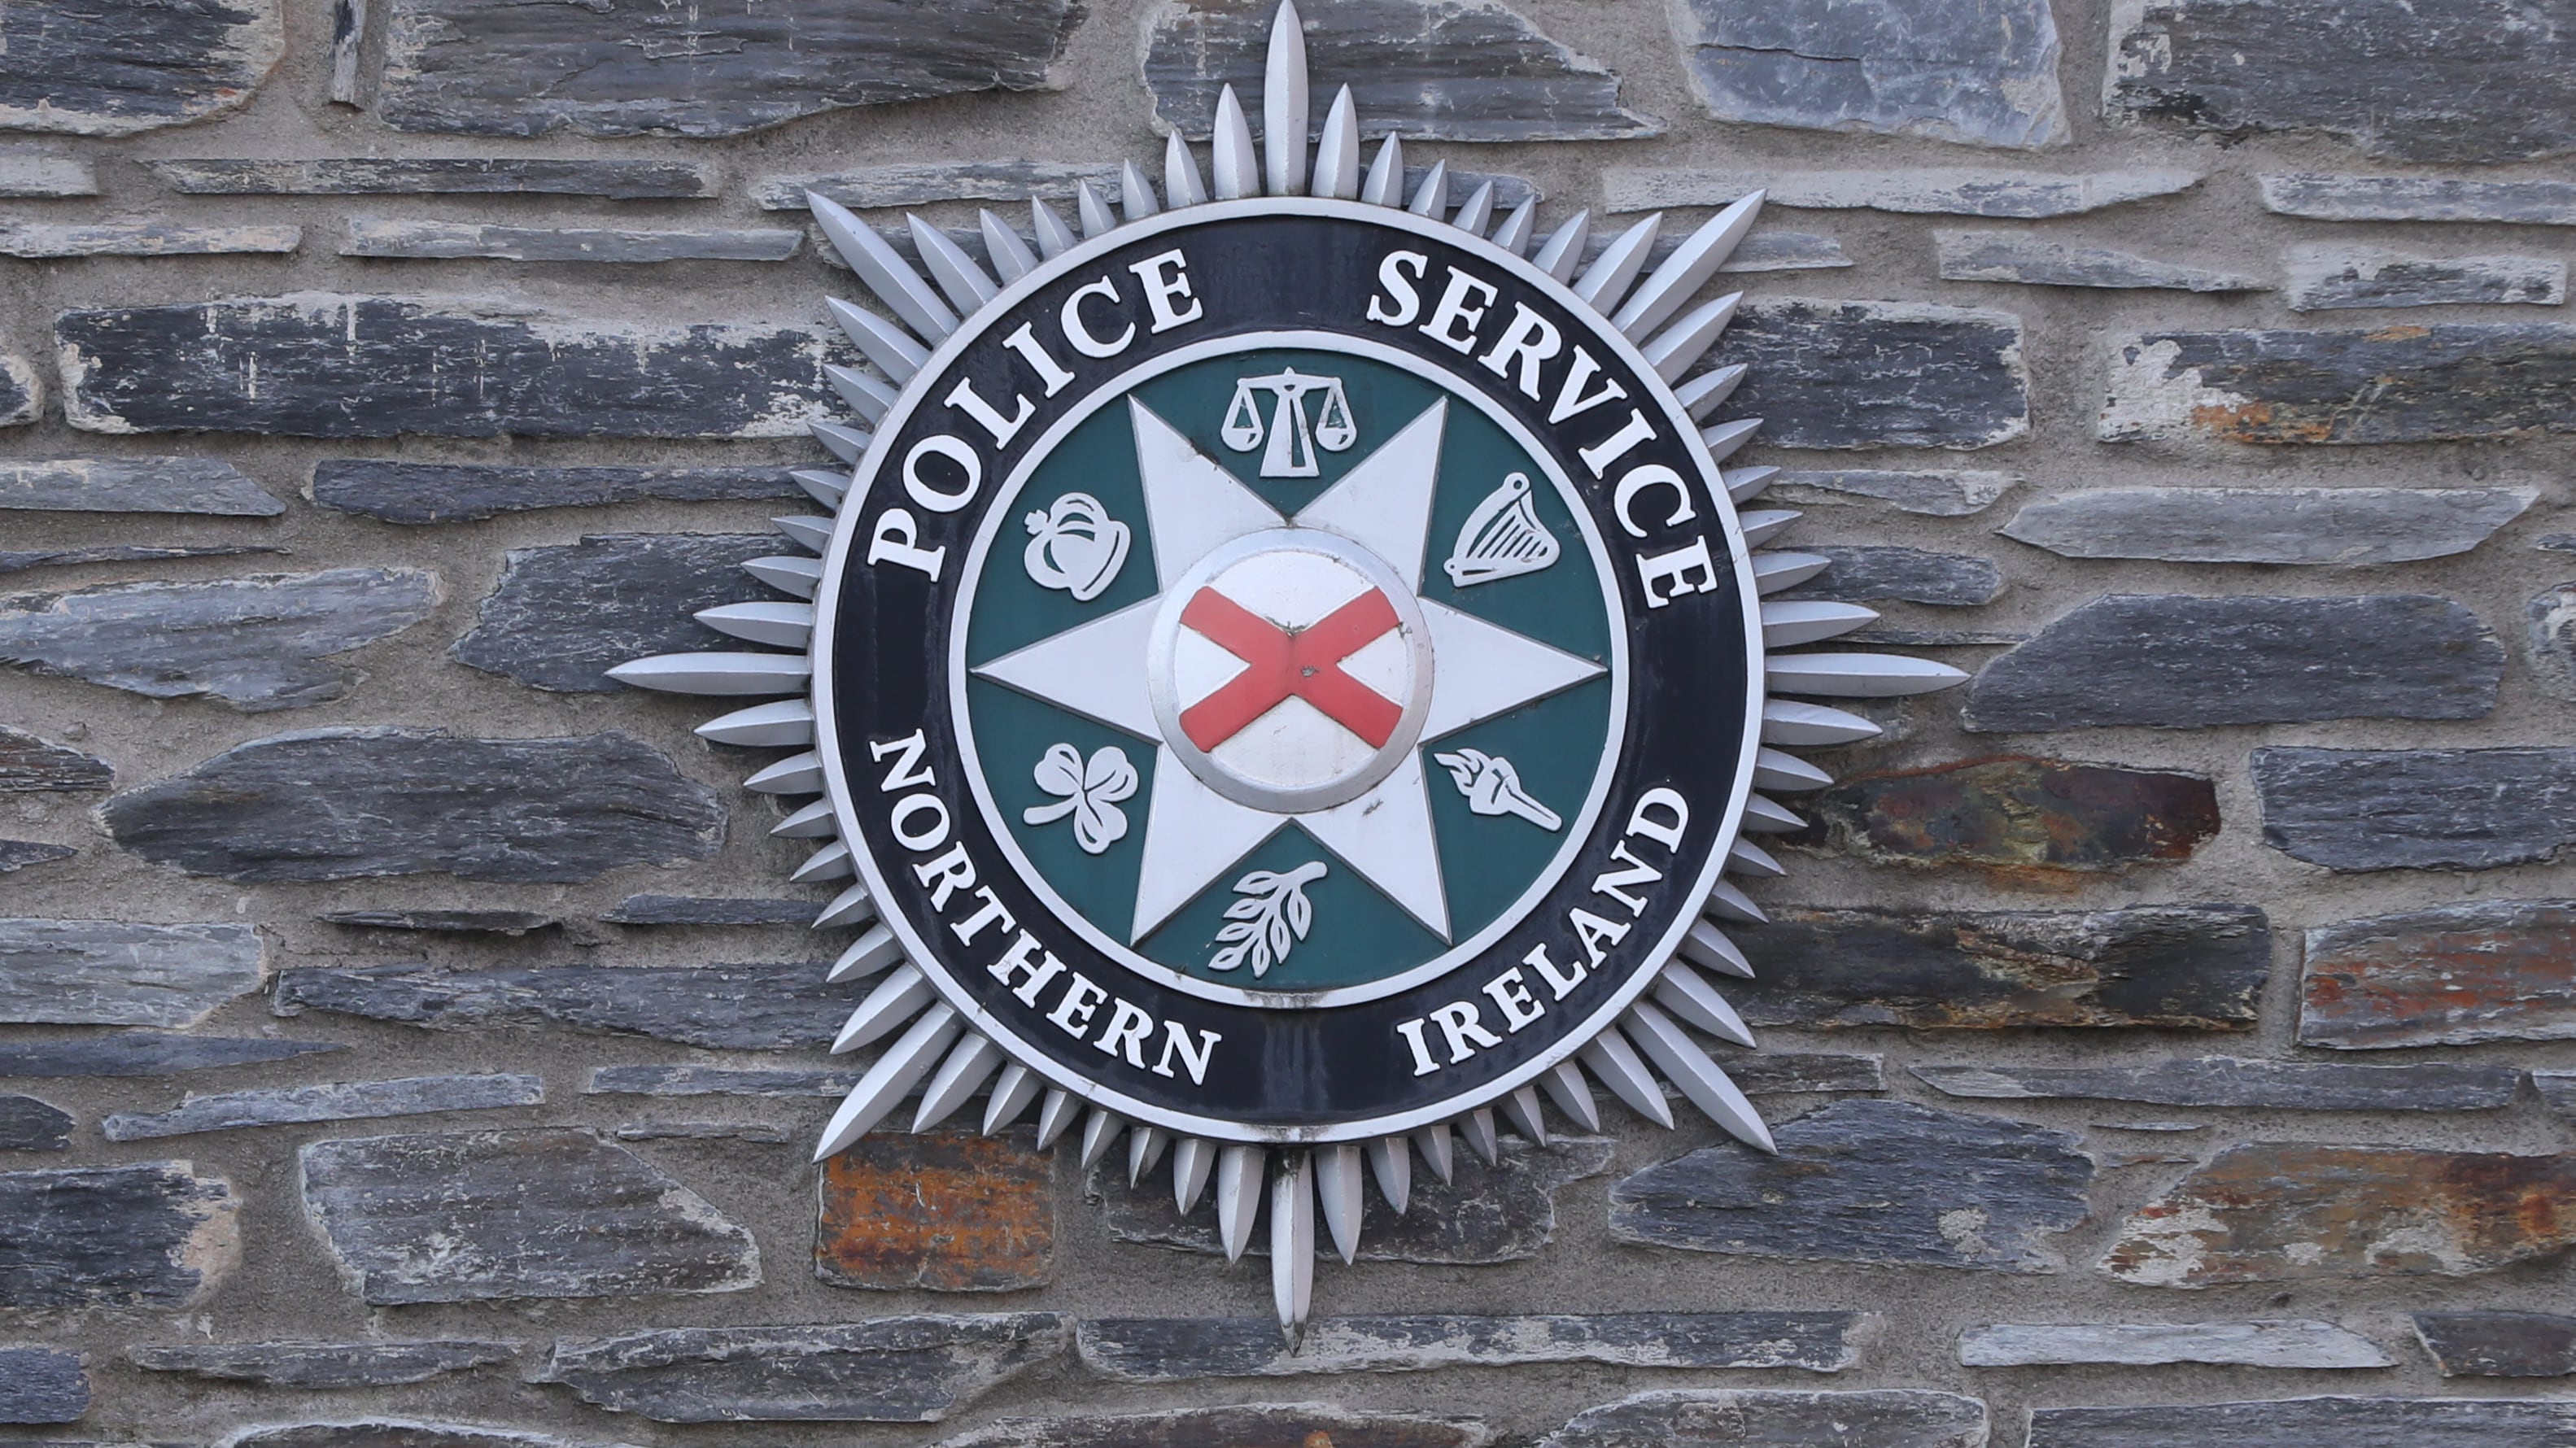 The PSNI has arrested a man over an attack in Co Antrim which saw a man nailed to a fence